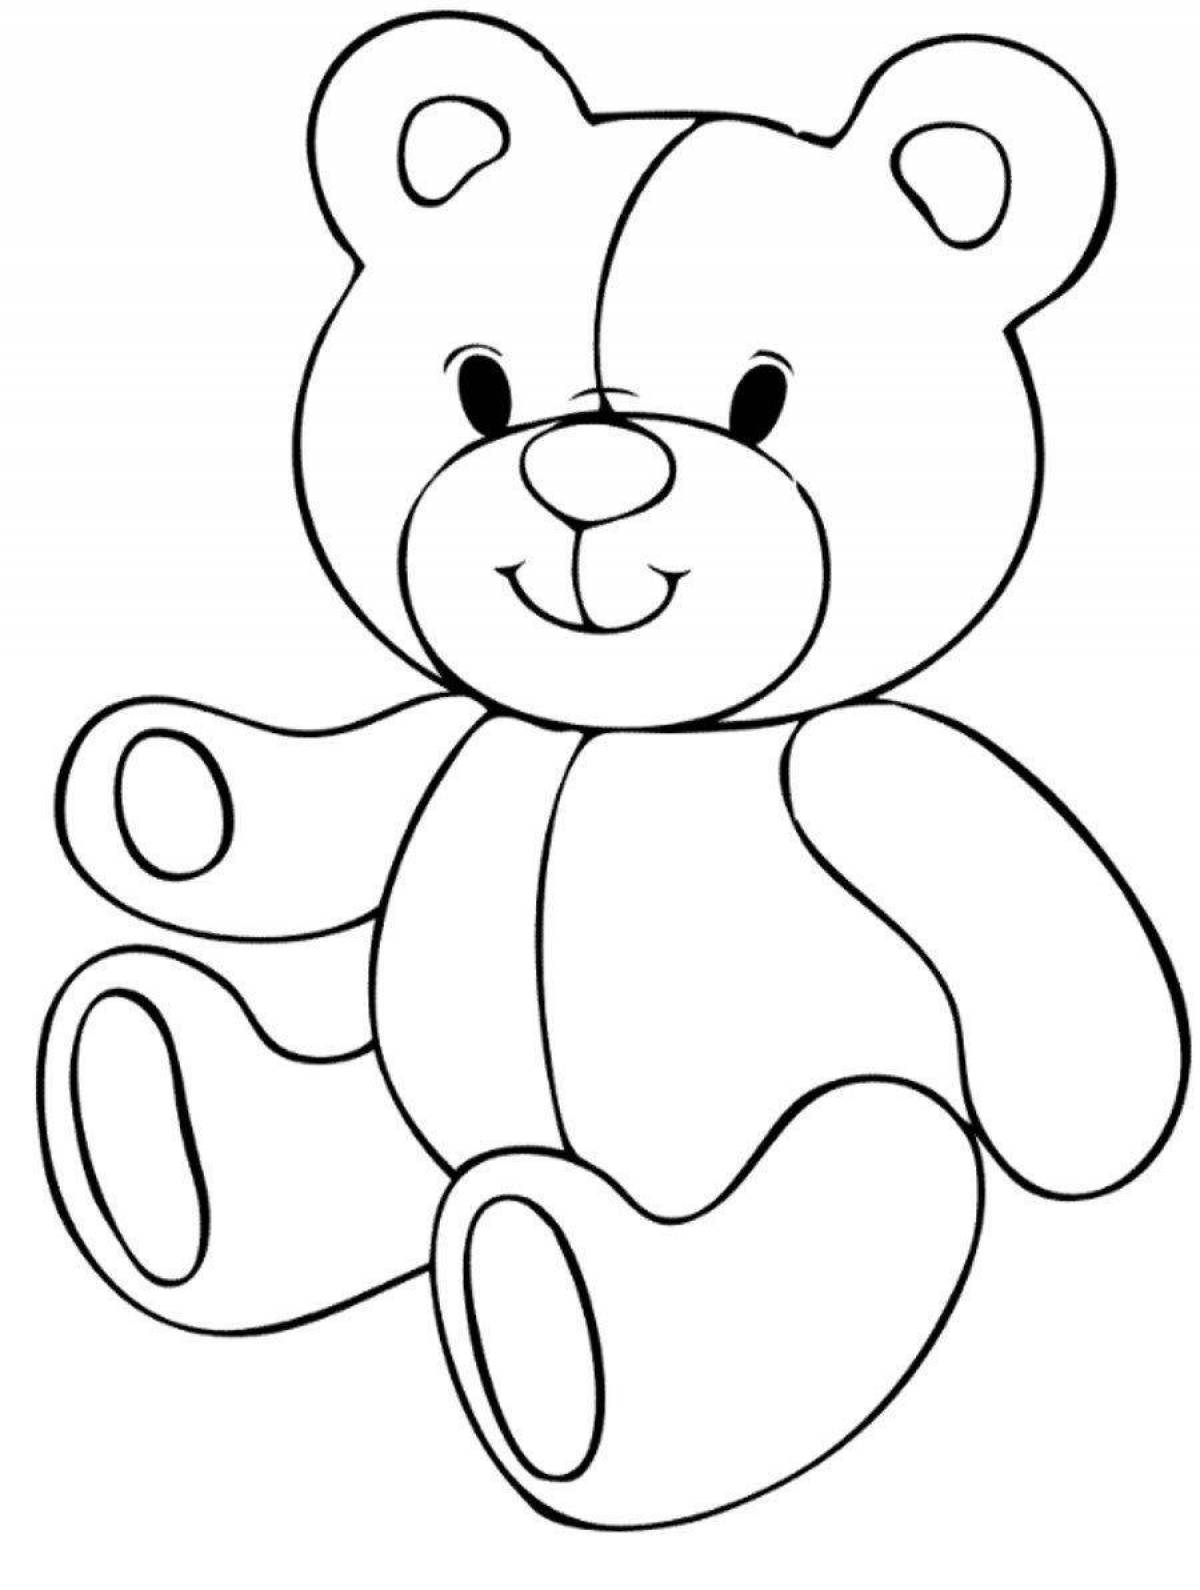 Coloring book sweet toy